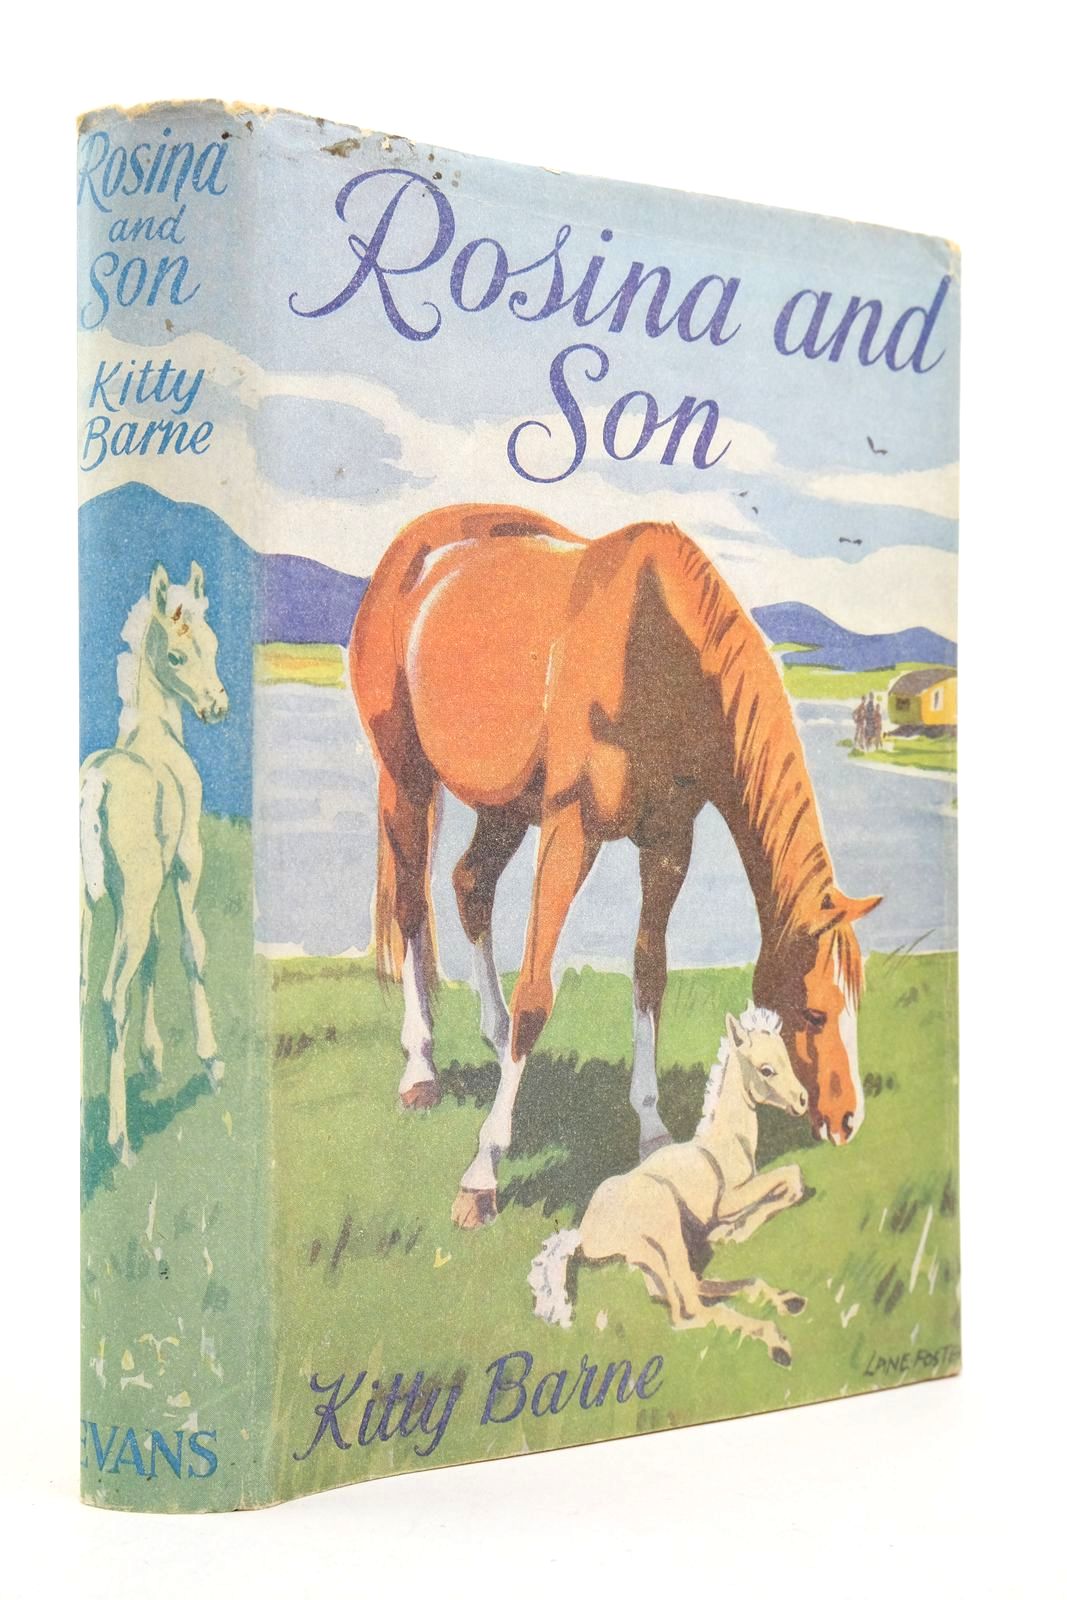 Photo of ROSINA AND SON written by Barne, Kitty illustrated by Foster, Marcia Lane published by Evans Brothers Limited (STOCK CODE: 2139969)  for sale by Stella & Rose's Books